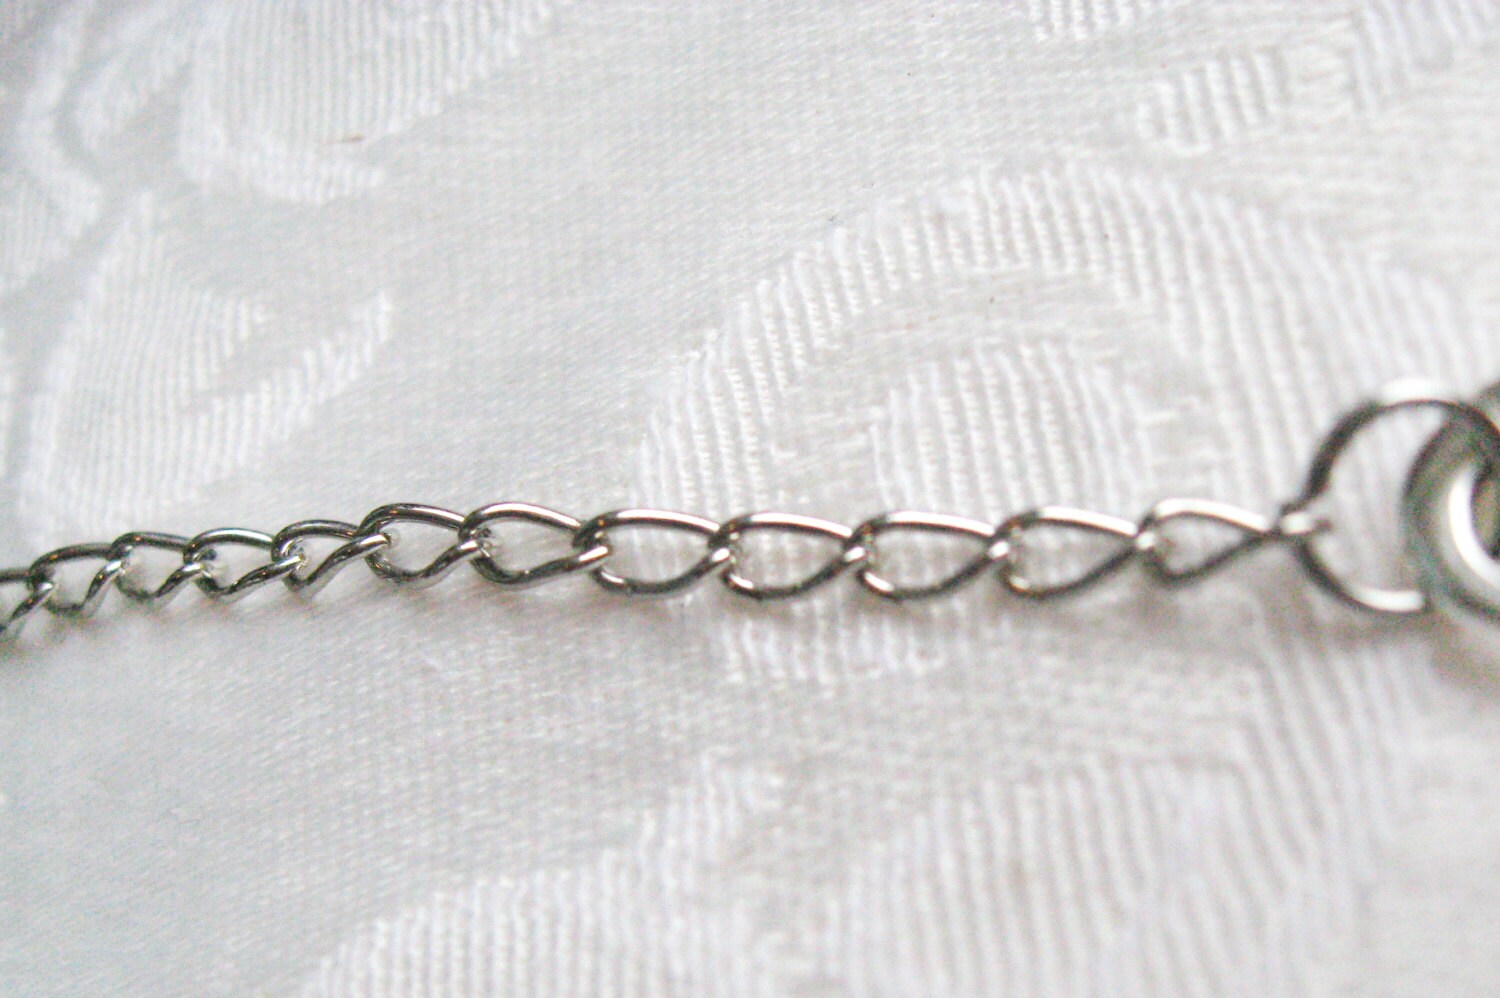 Silver Infinity Charm Bracelet Friendship or Loved One Gift - Etsy